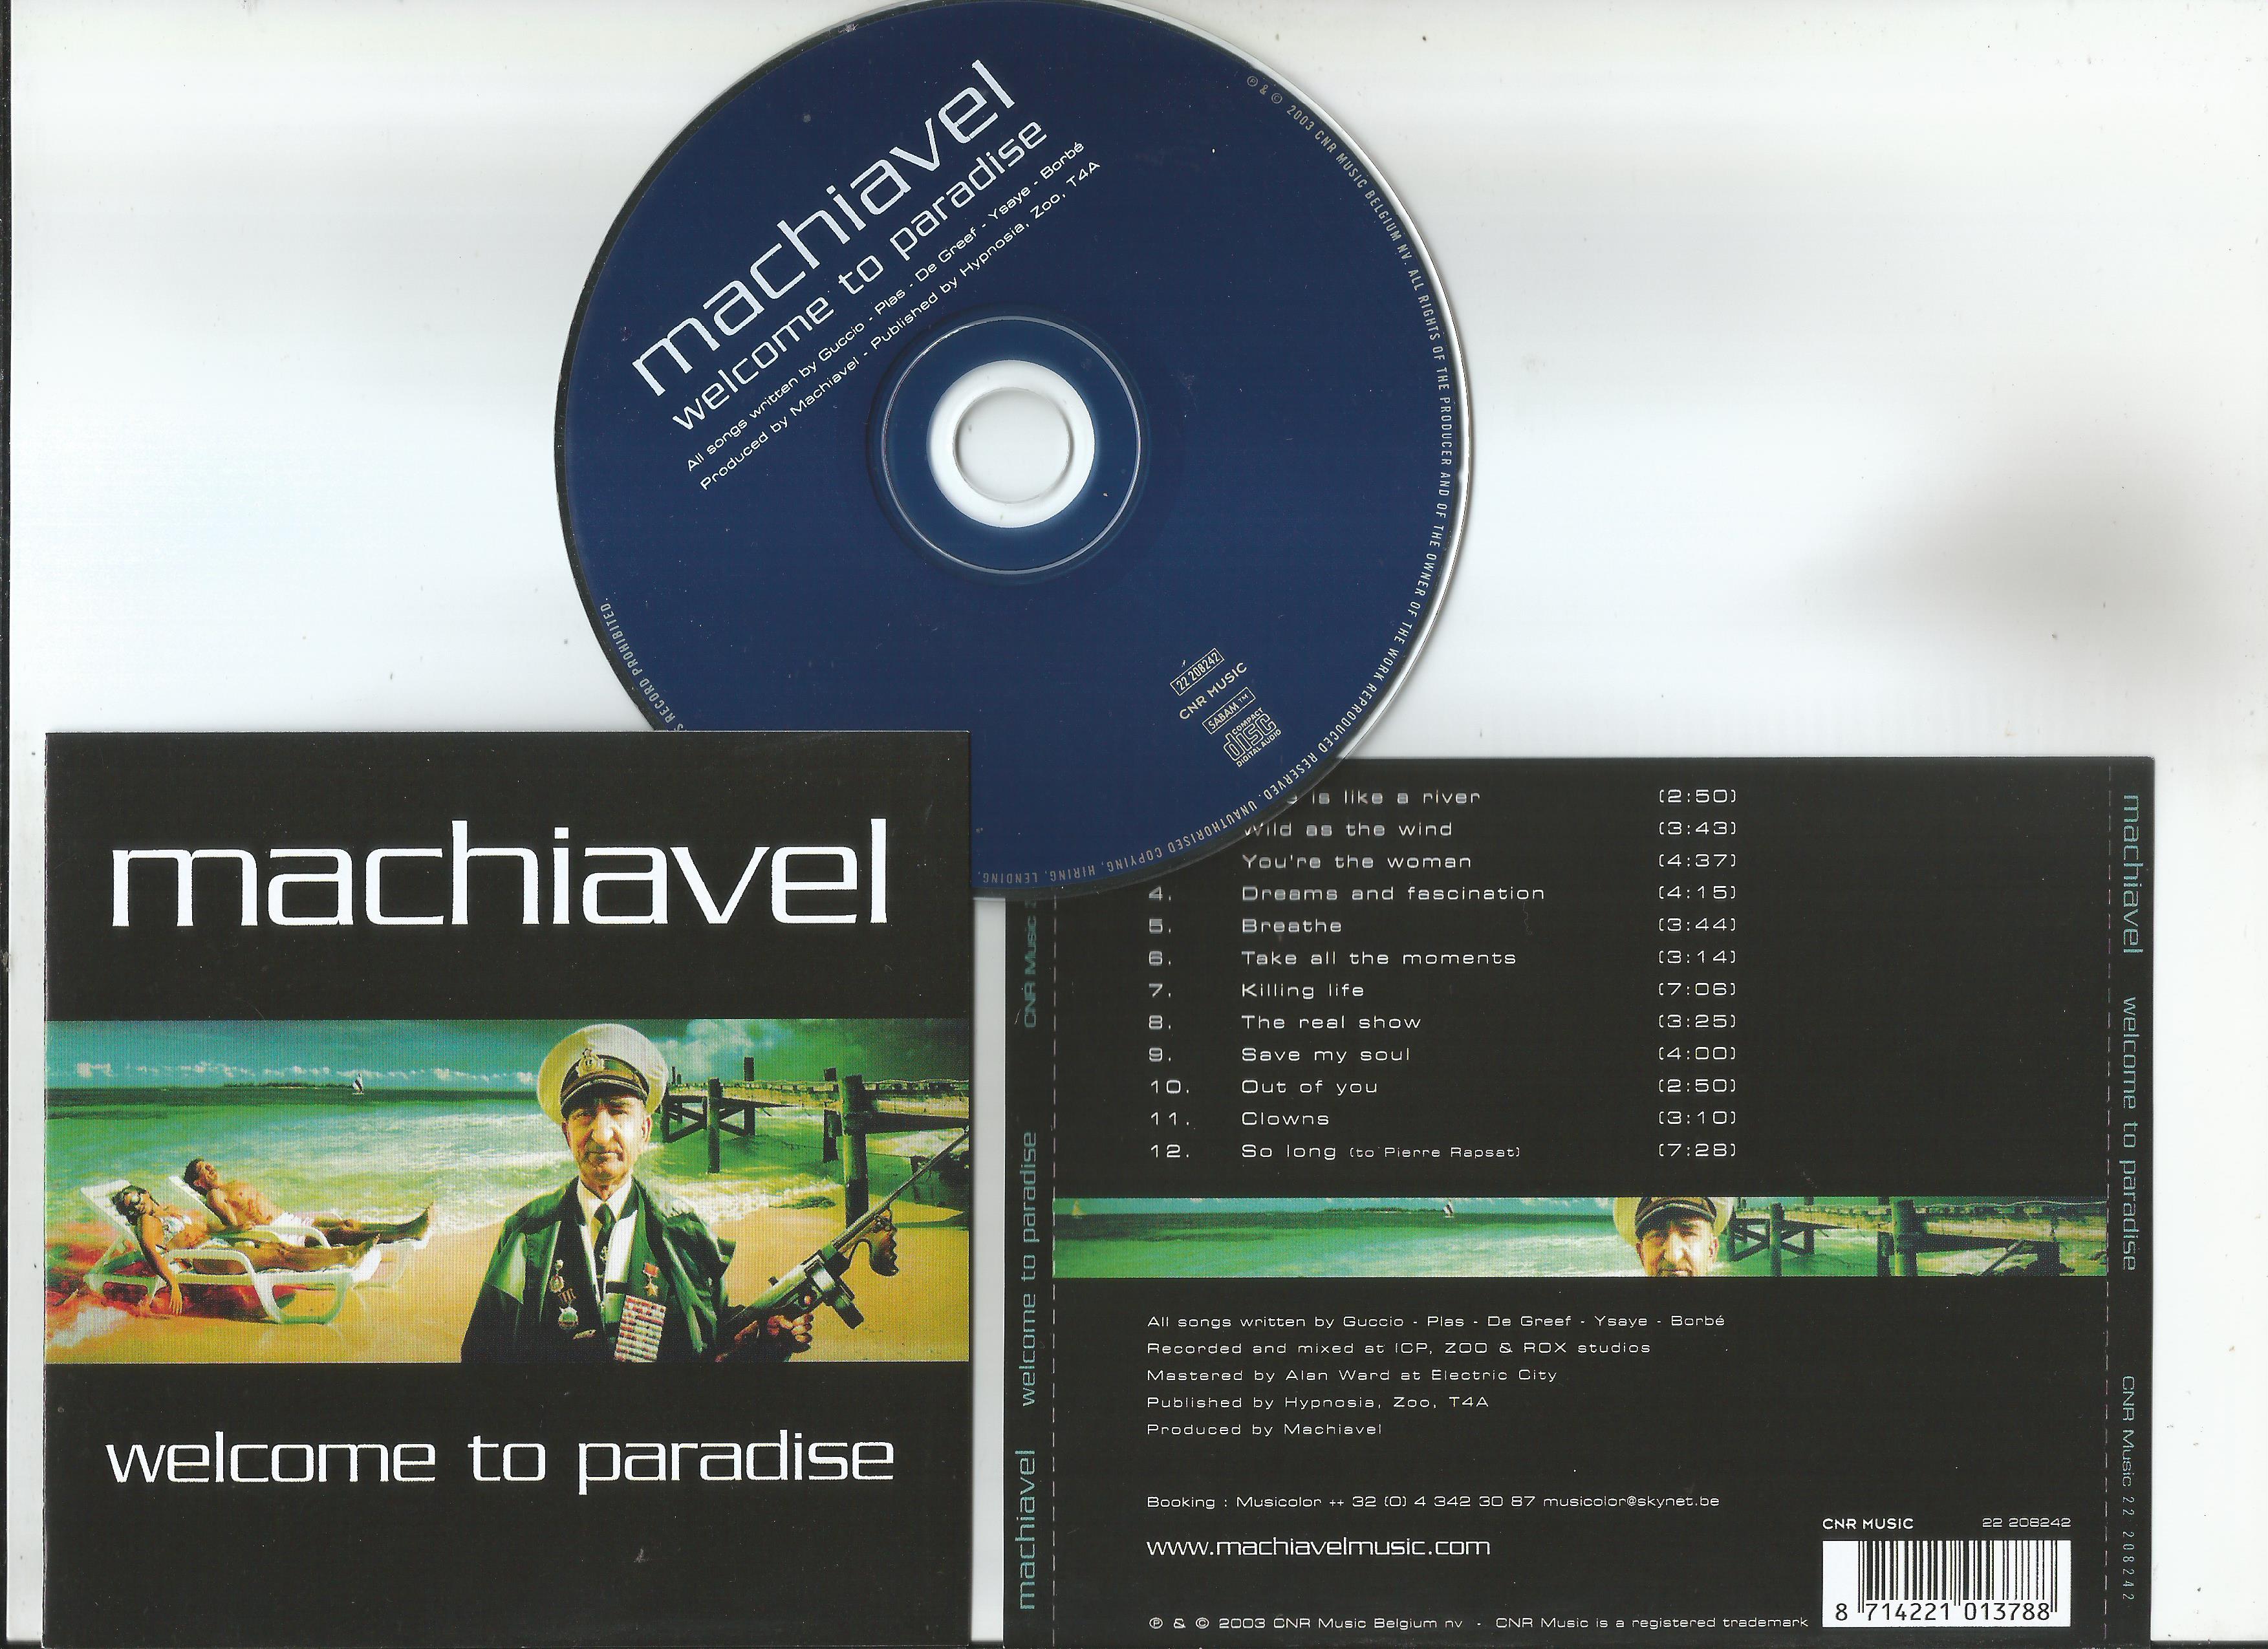 Welcome to paradise обзор. Welcome to Paradise. Welcome to Paradise игра. Machiavel Band. Welcome to Paradise фанфик.